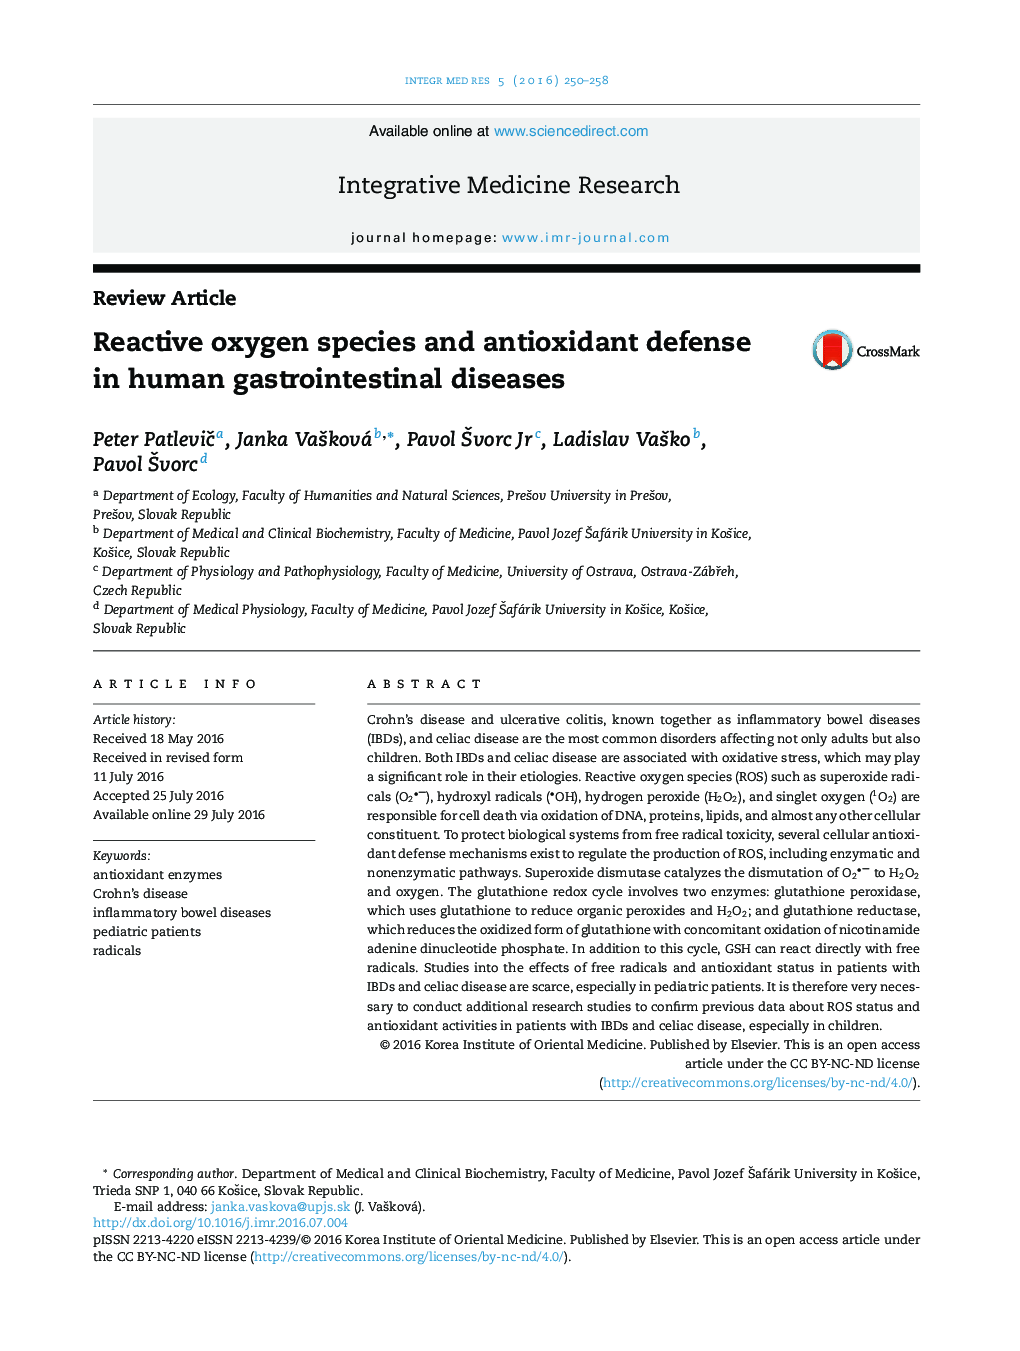 Reactive oxygen species and antioxidant defense in human gastrointestinal diseases